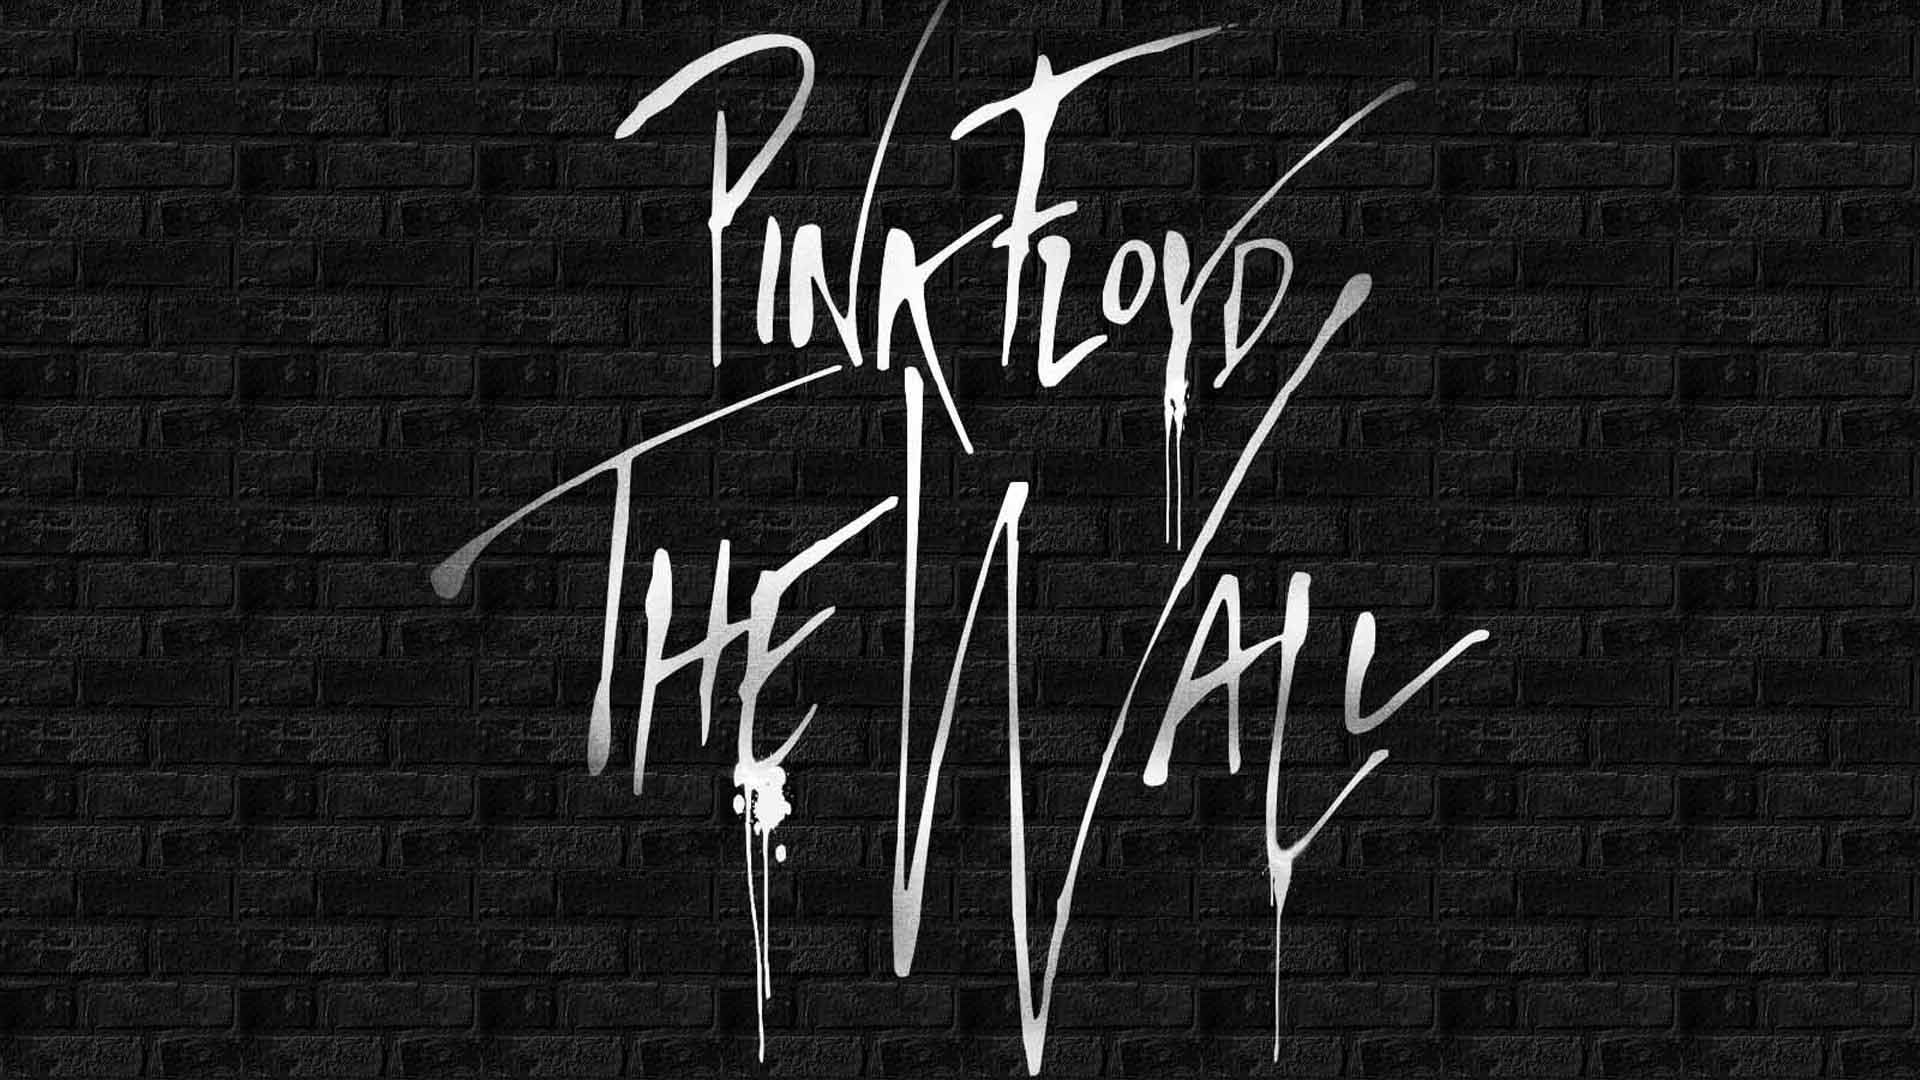 PINK FLOYD: THE WALL. Pink floyd wallpaper, Pink floyd picture, Pink floyd wall